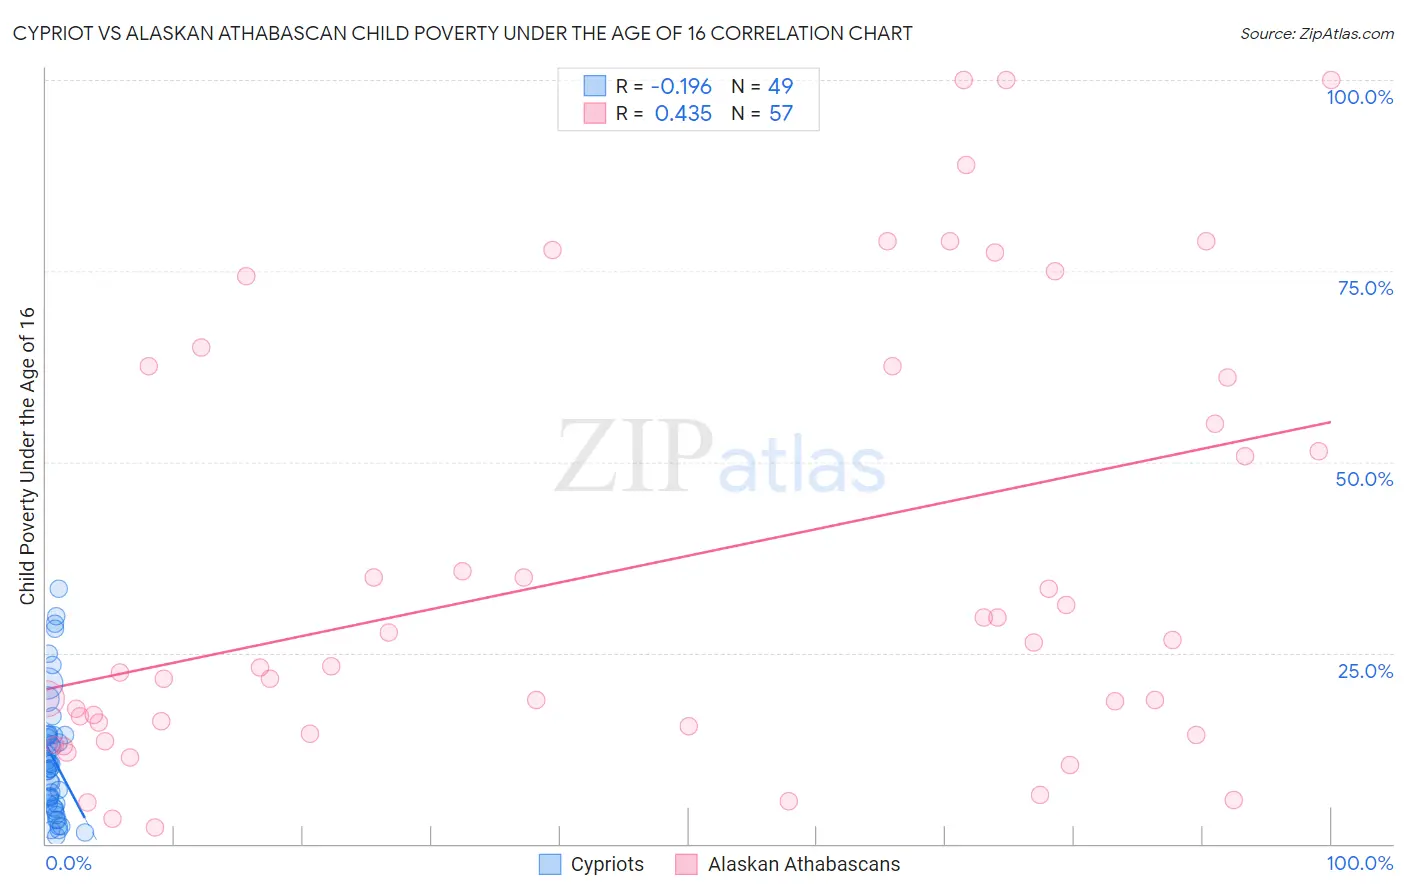 Cypriot vs Alaskan Athabascan Child Poverty Under the Age of 16